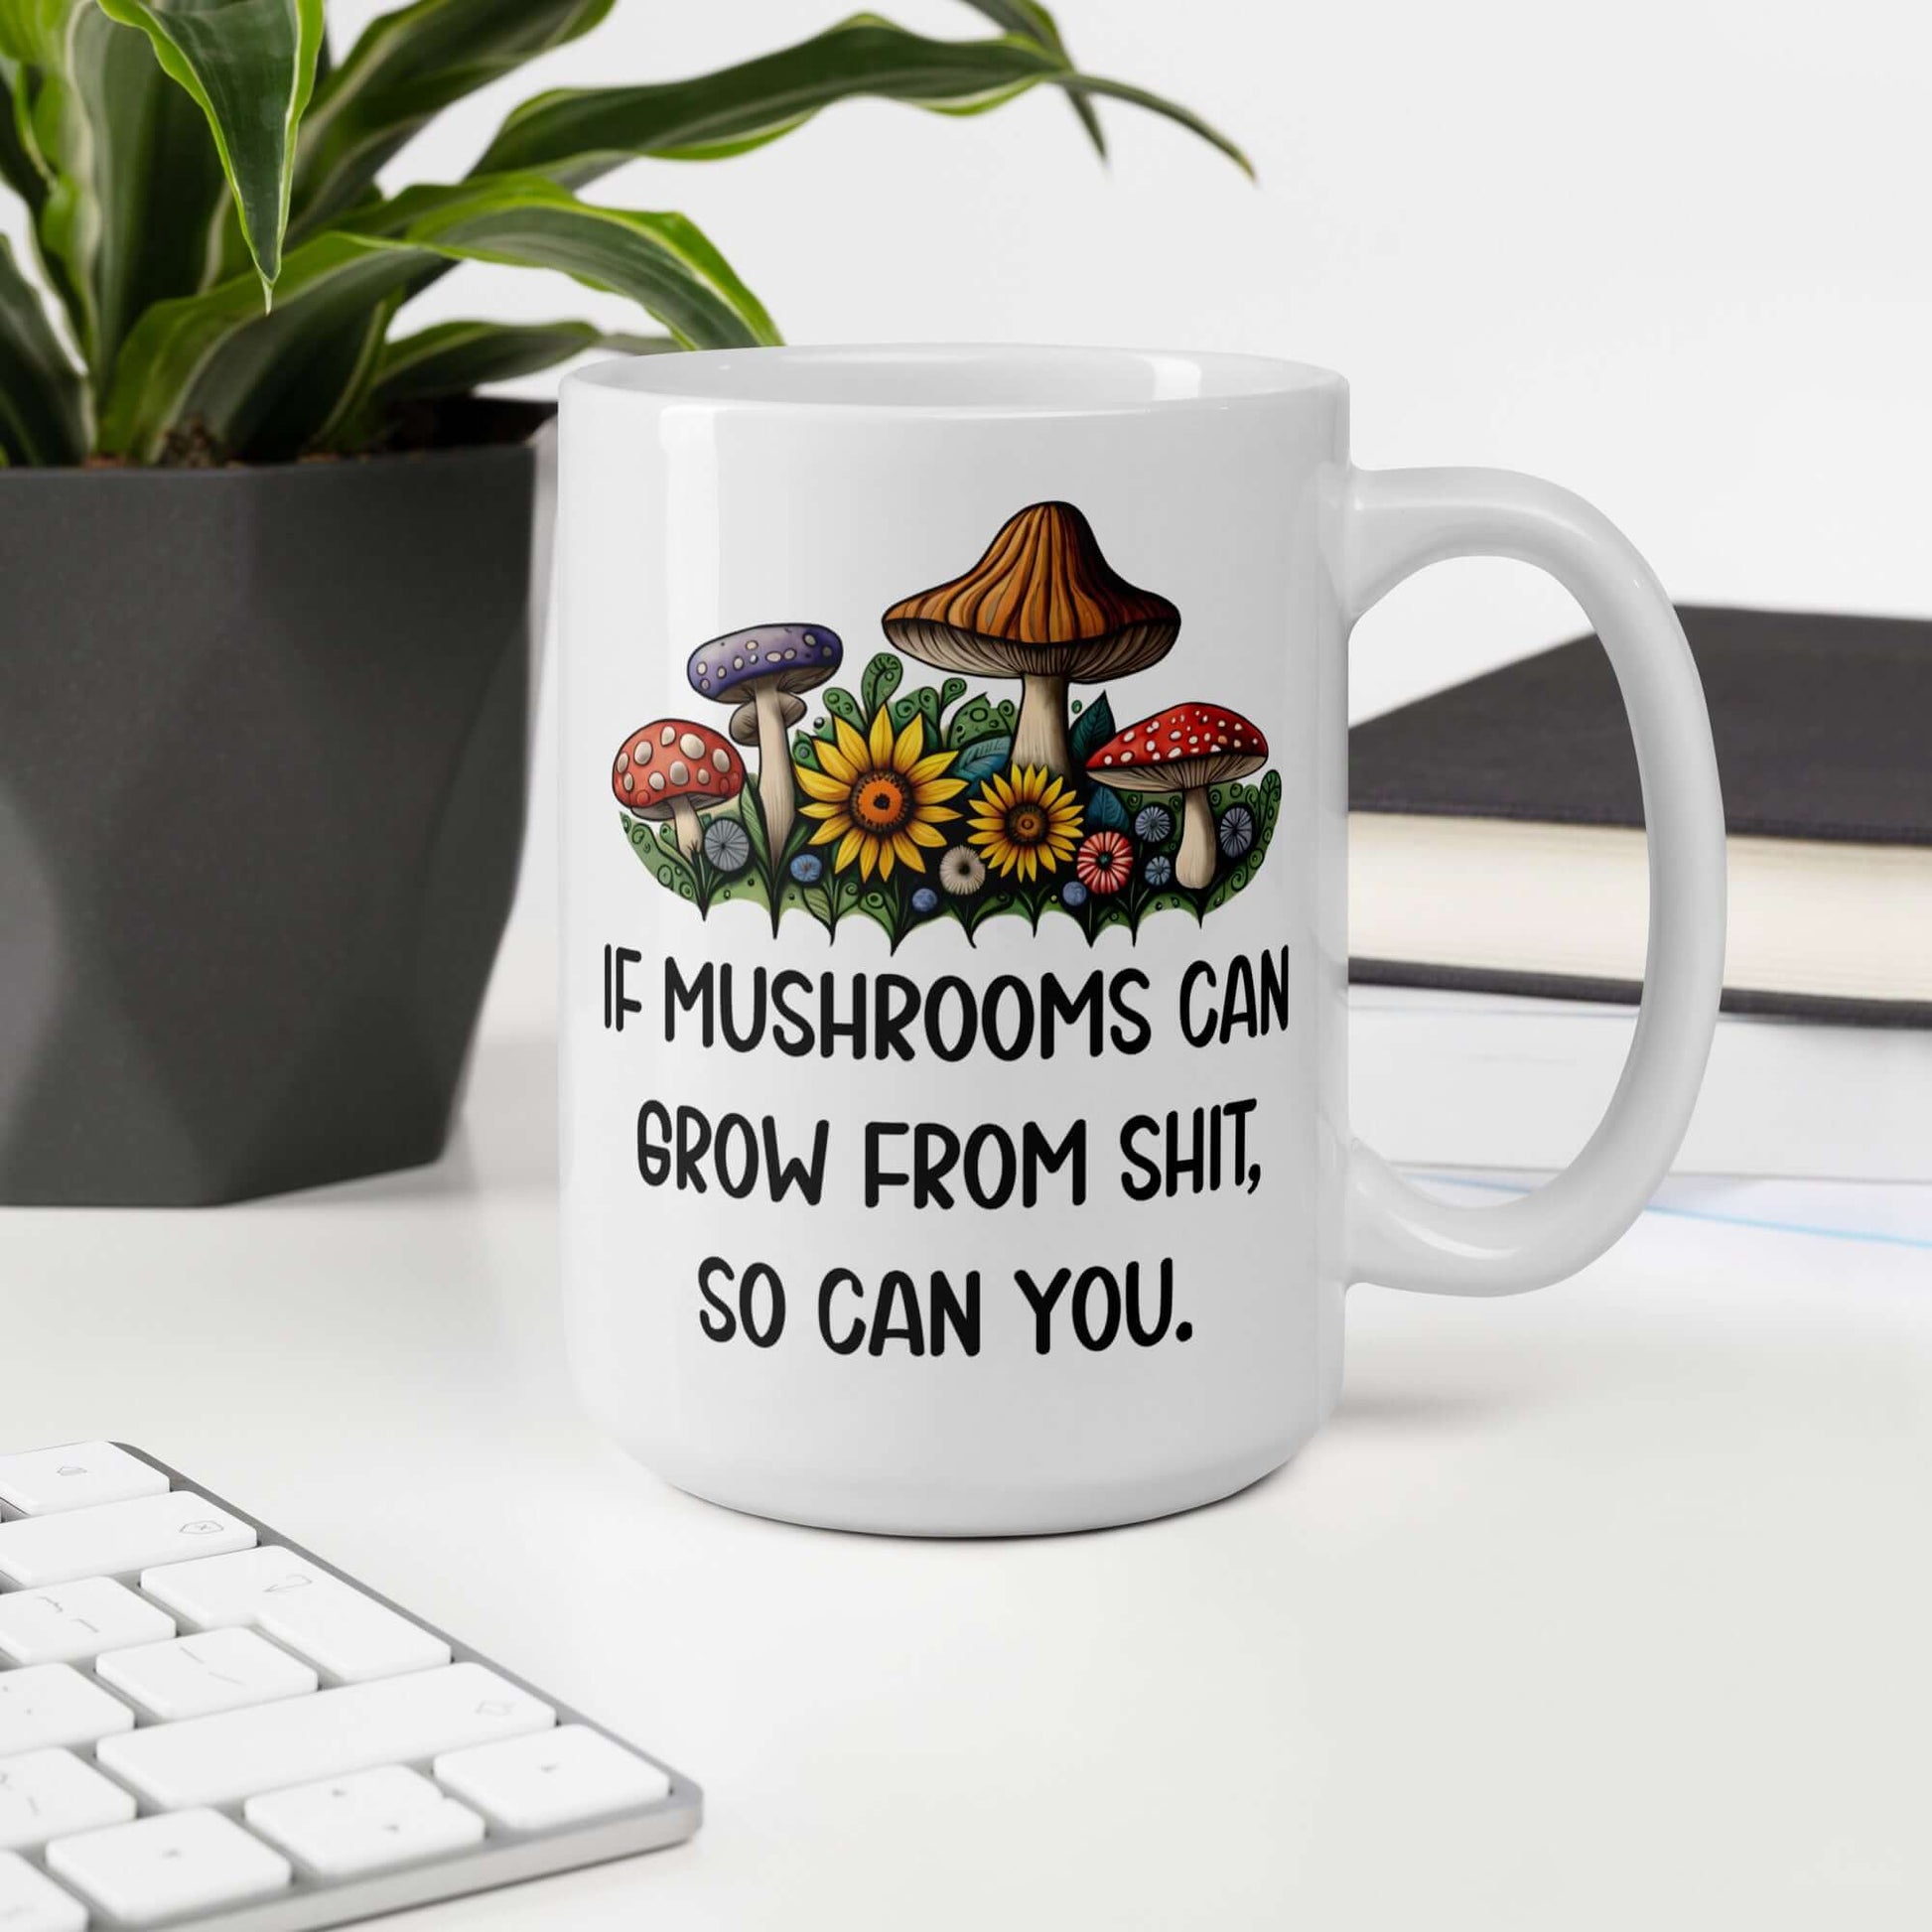 White ceramic mug with images of mushrooms and the phrase If mushrooms can grow from shit so can you printed on both sides of the mug.